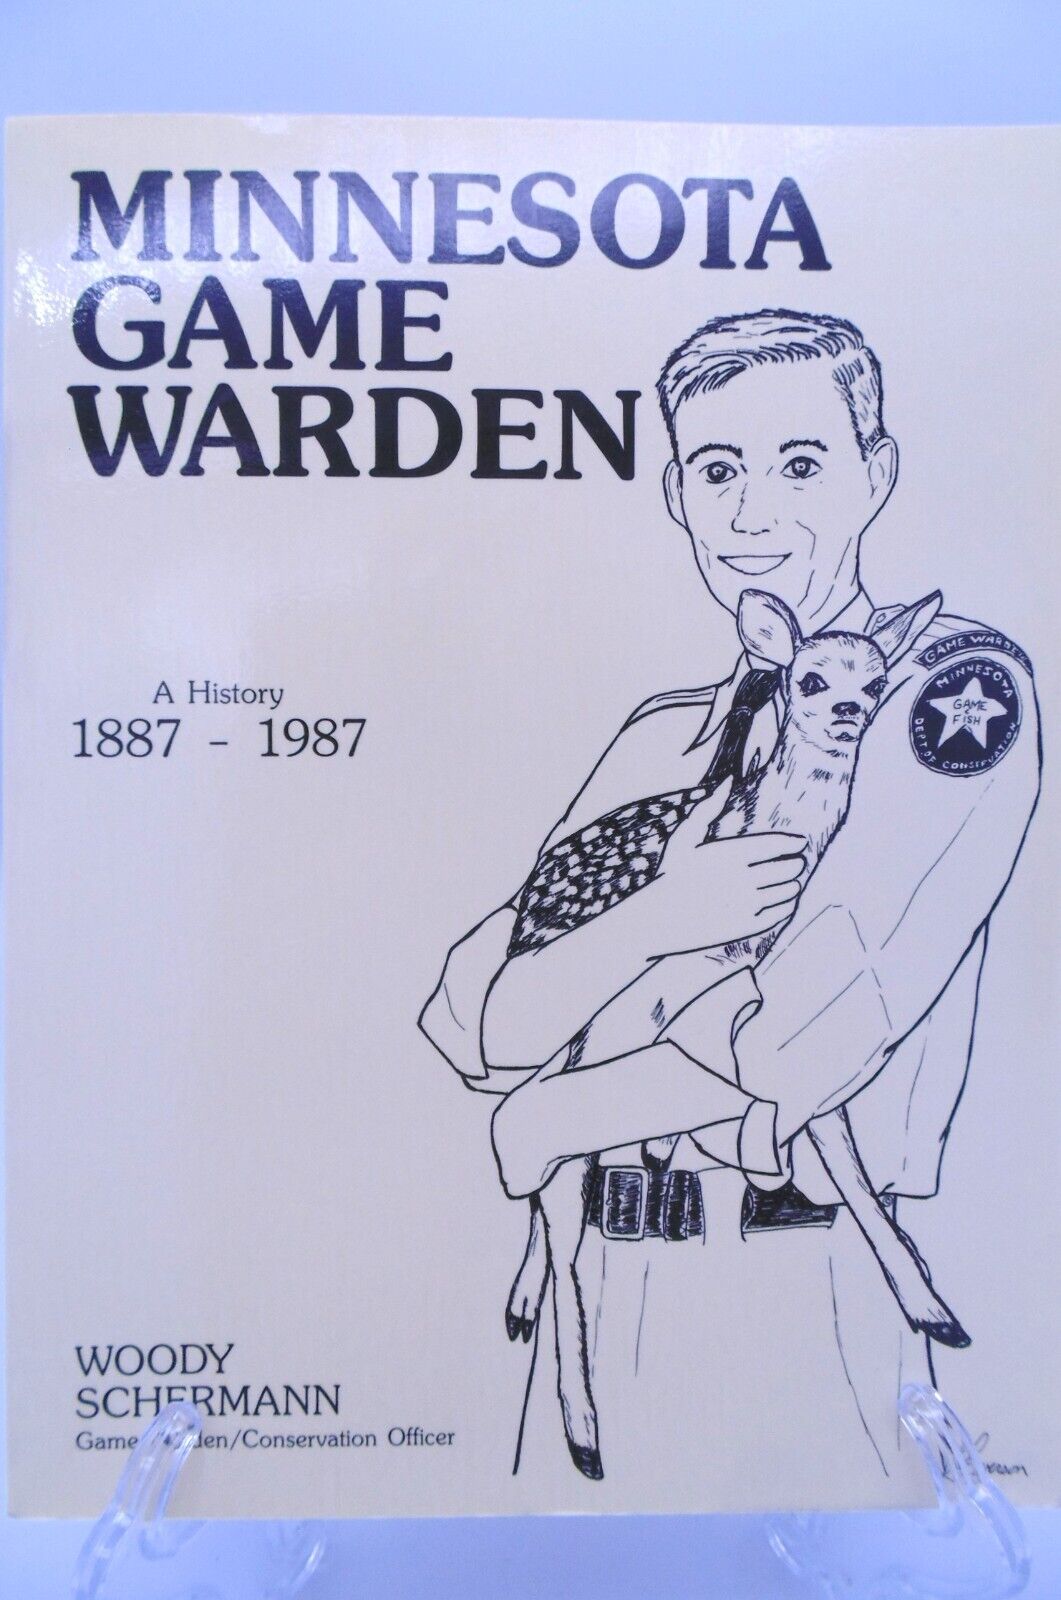 Minnesota Game Warden  A History 1887-1987 by Woody Schermann Softcover Book VGC